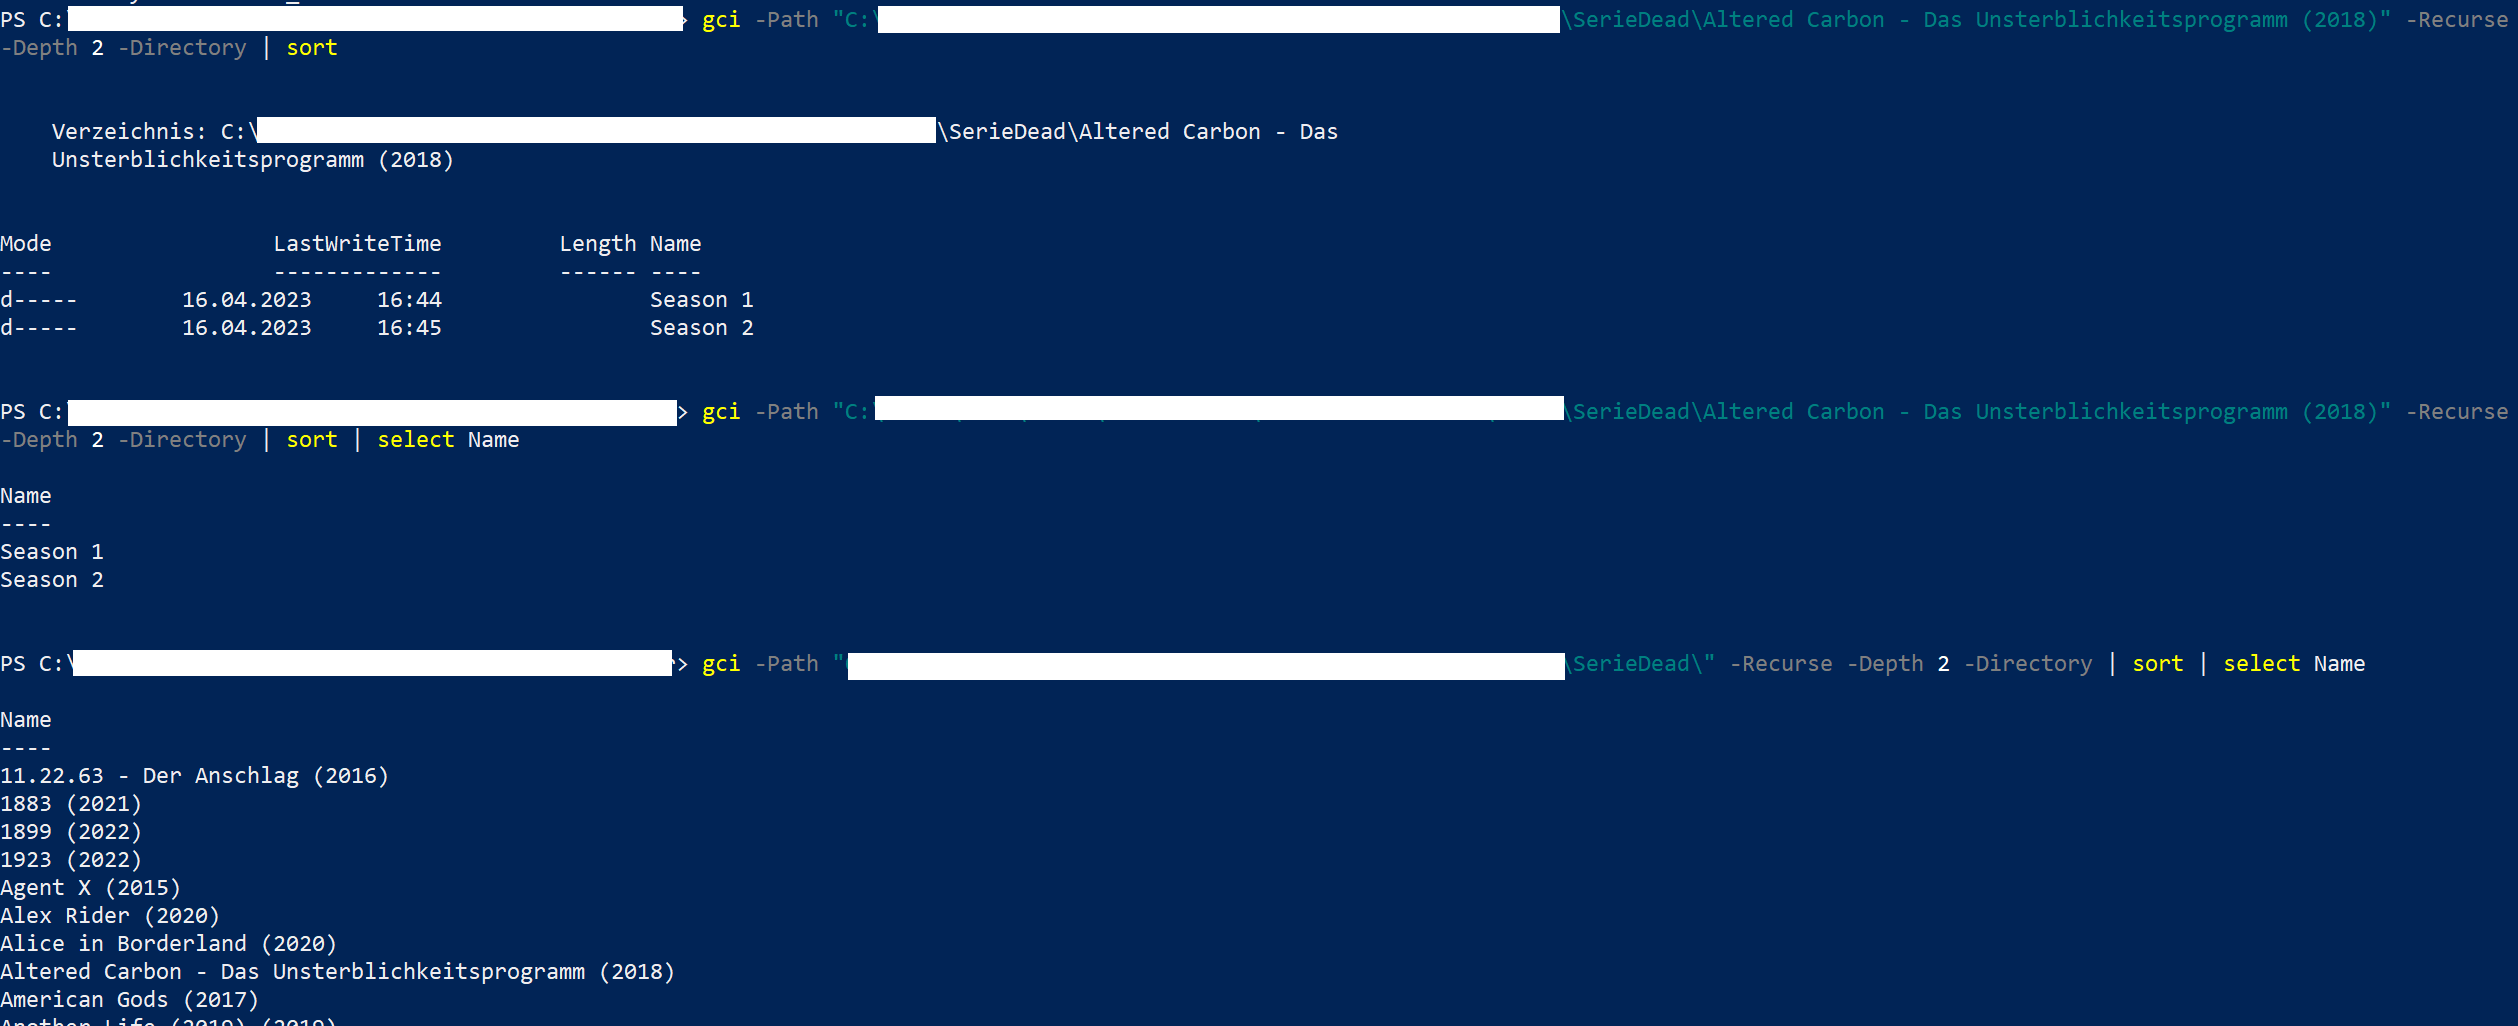 powershell.png